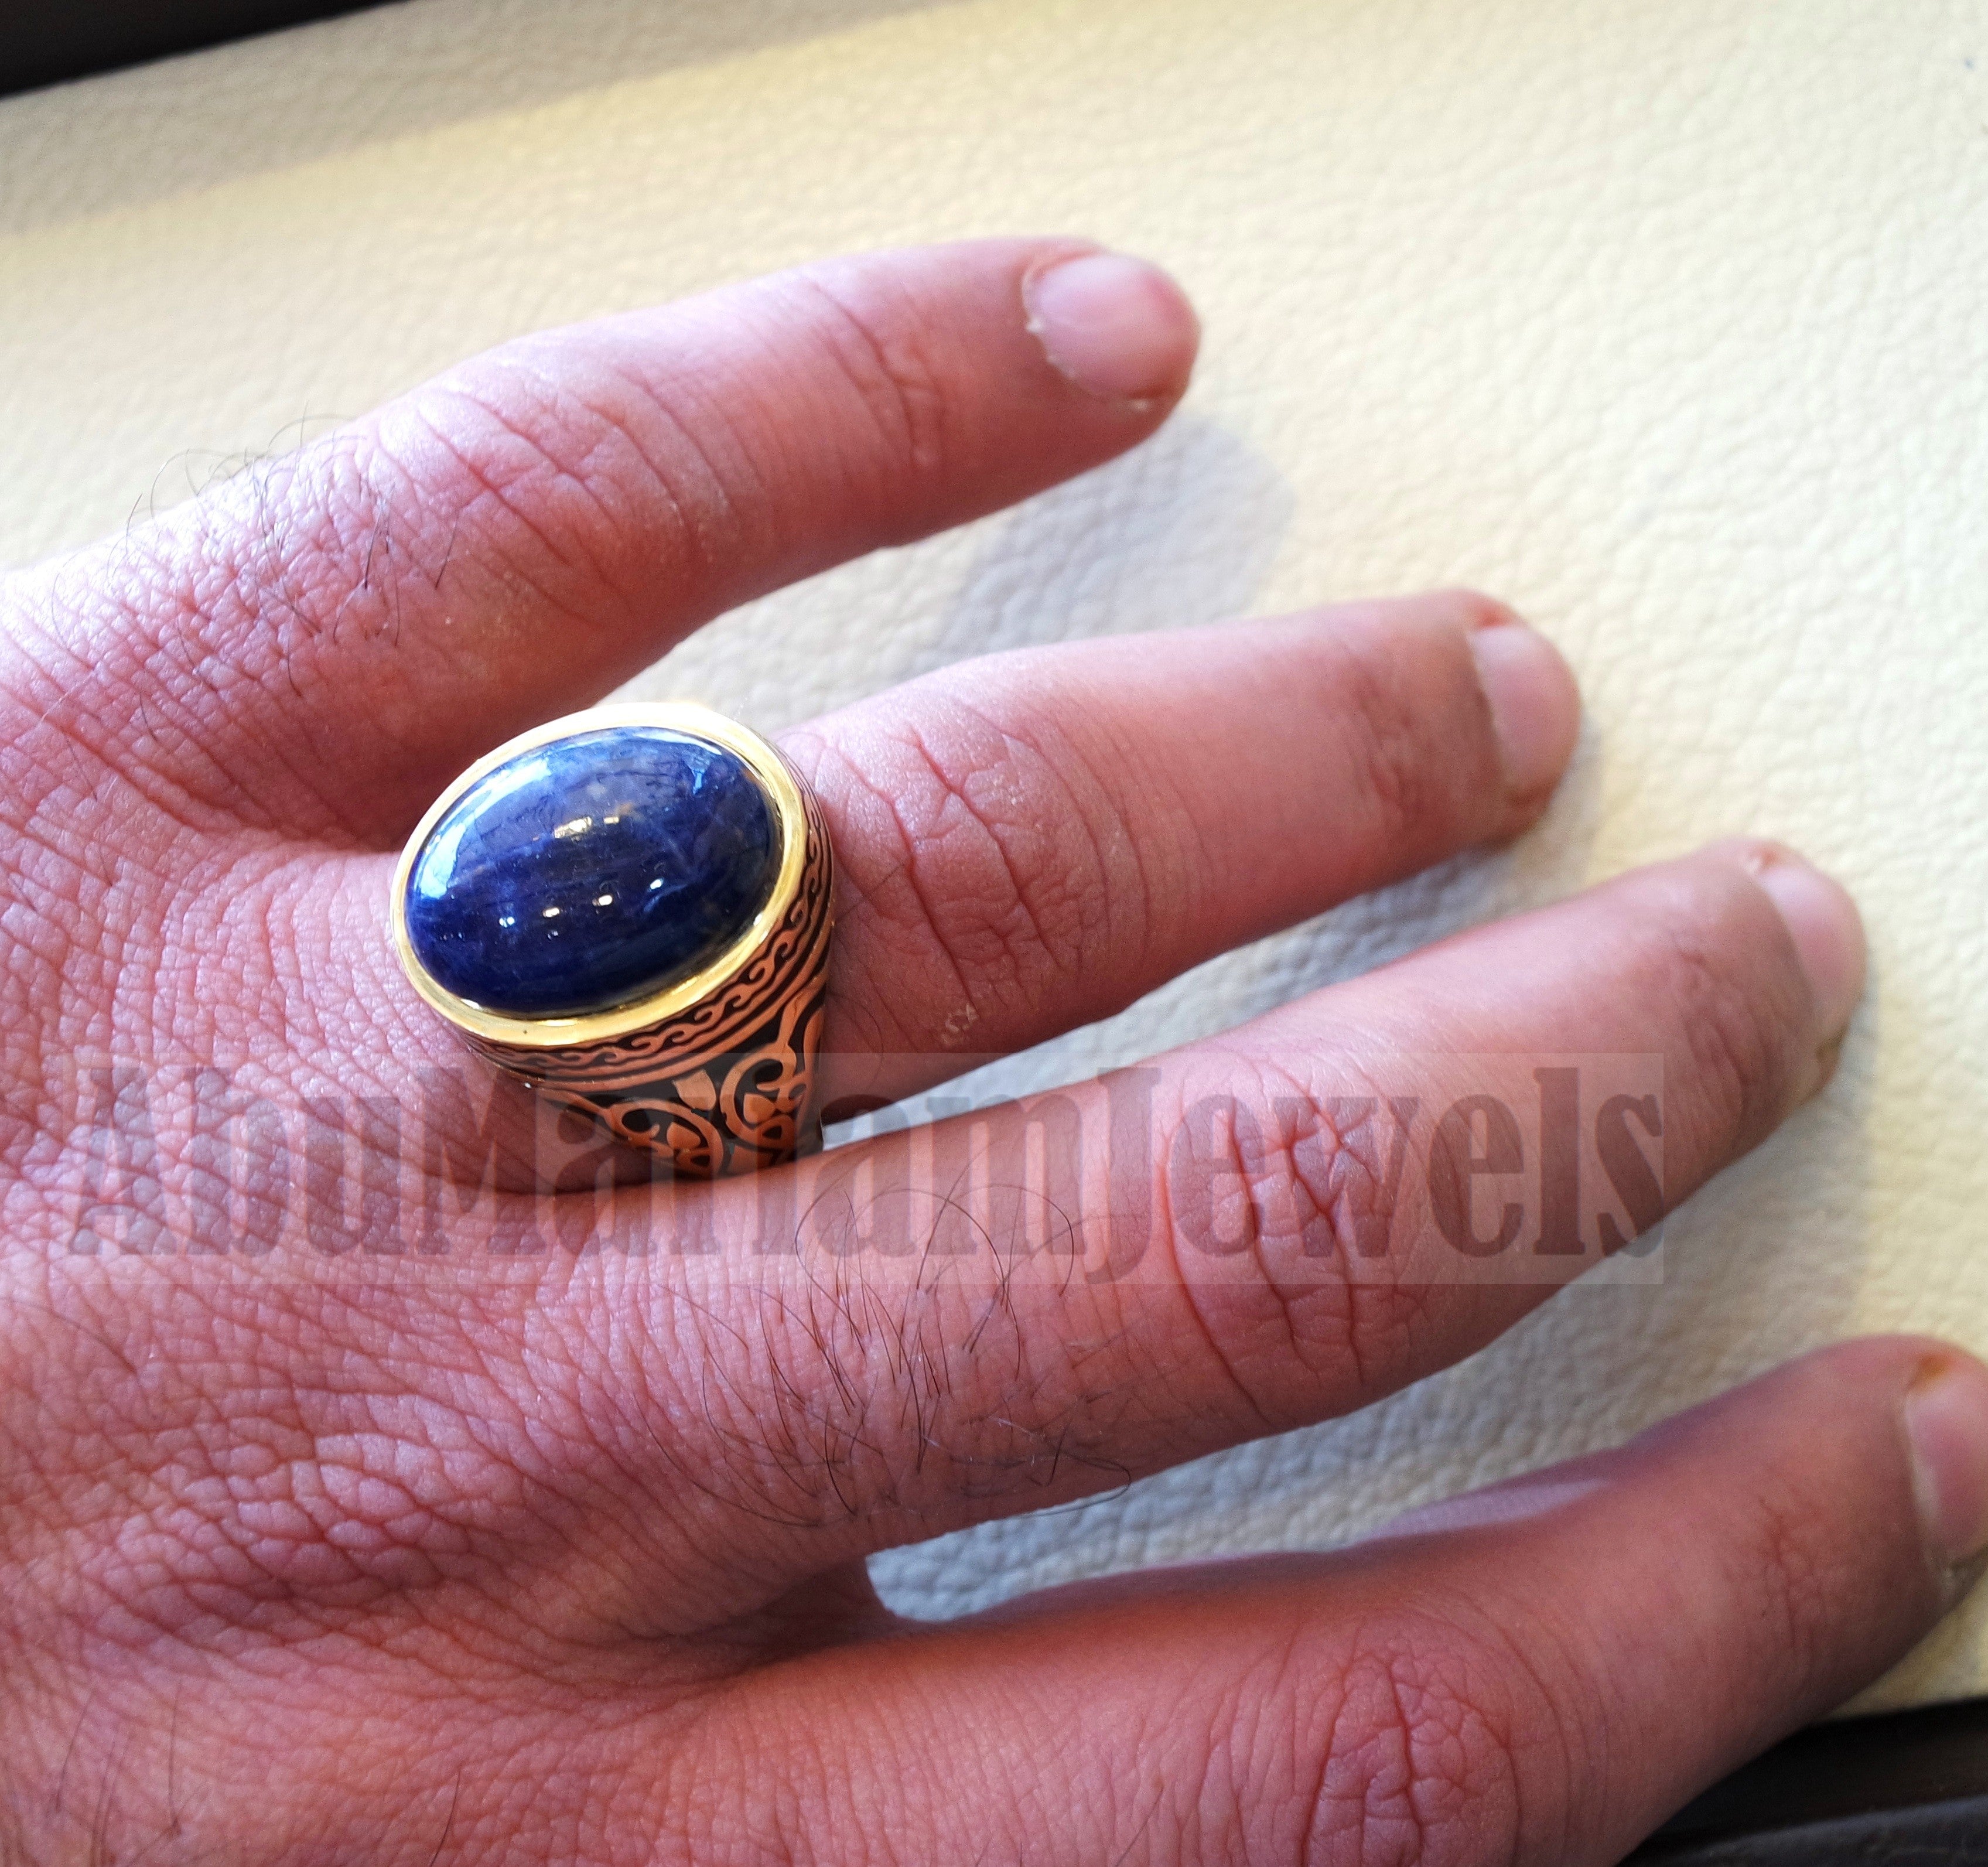 18k yellow gold men ring sodalite cabochon high quality natural stone all sizes Ottoman signet style fine jewelry fast shipping